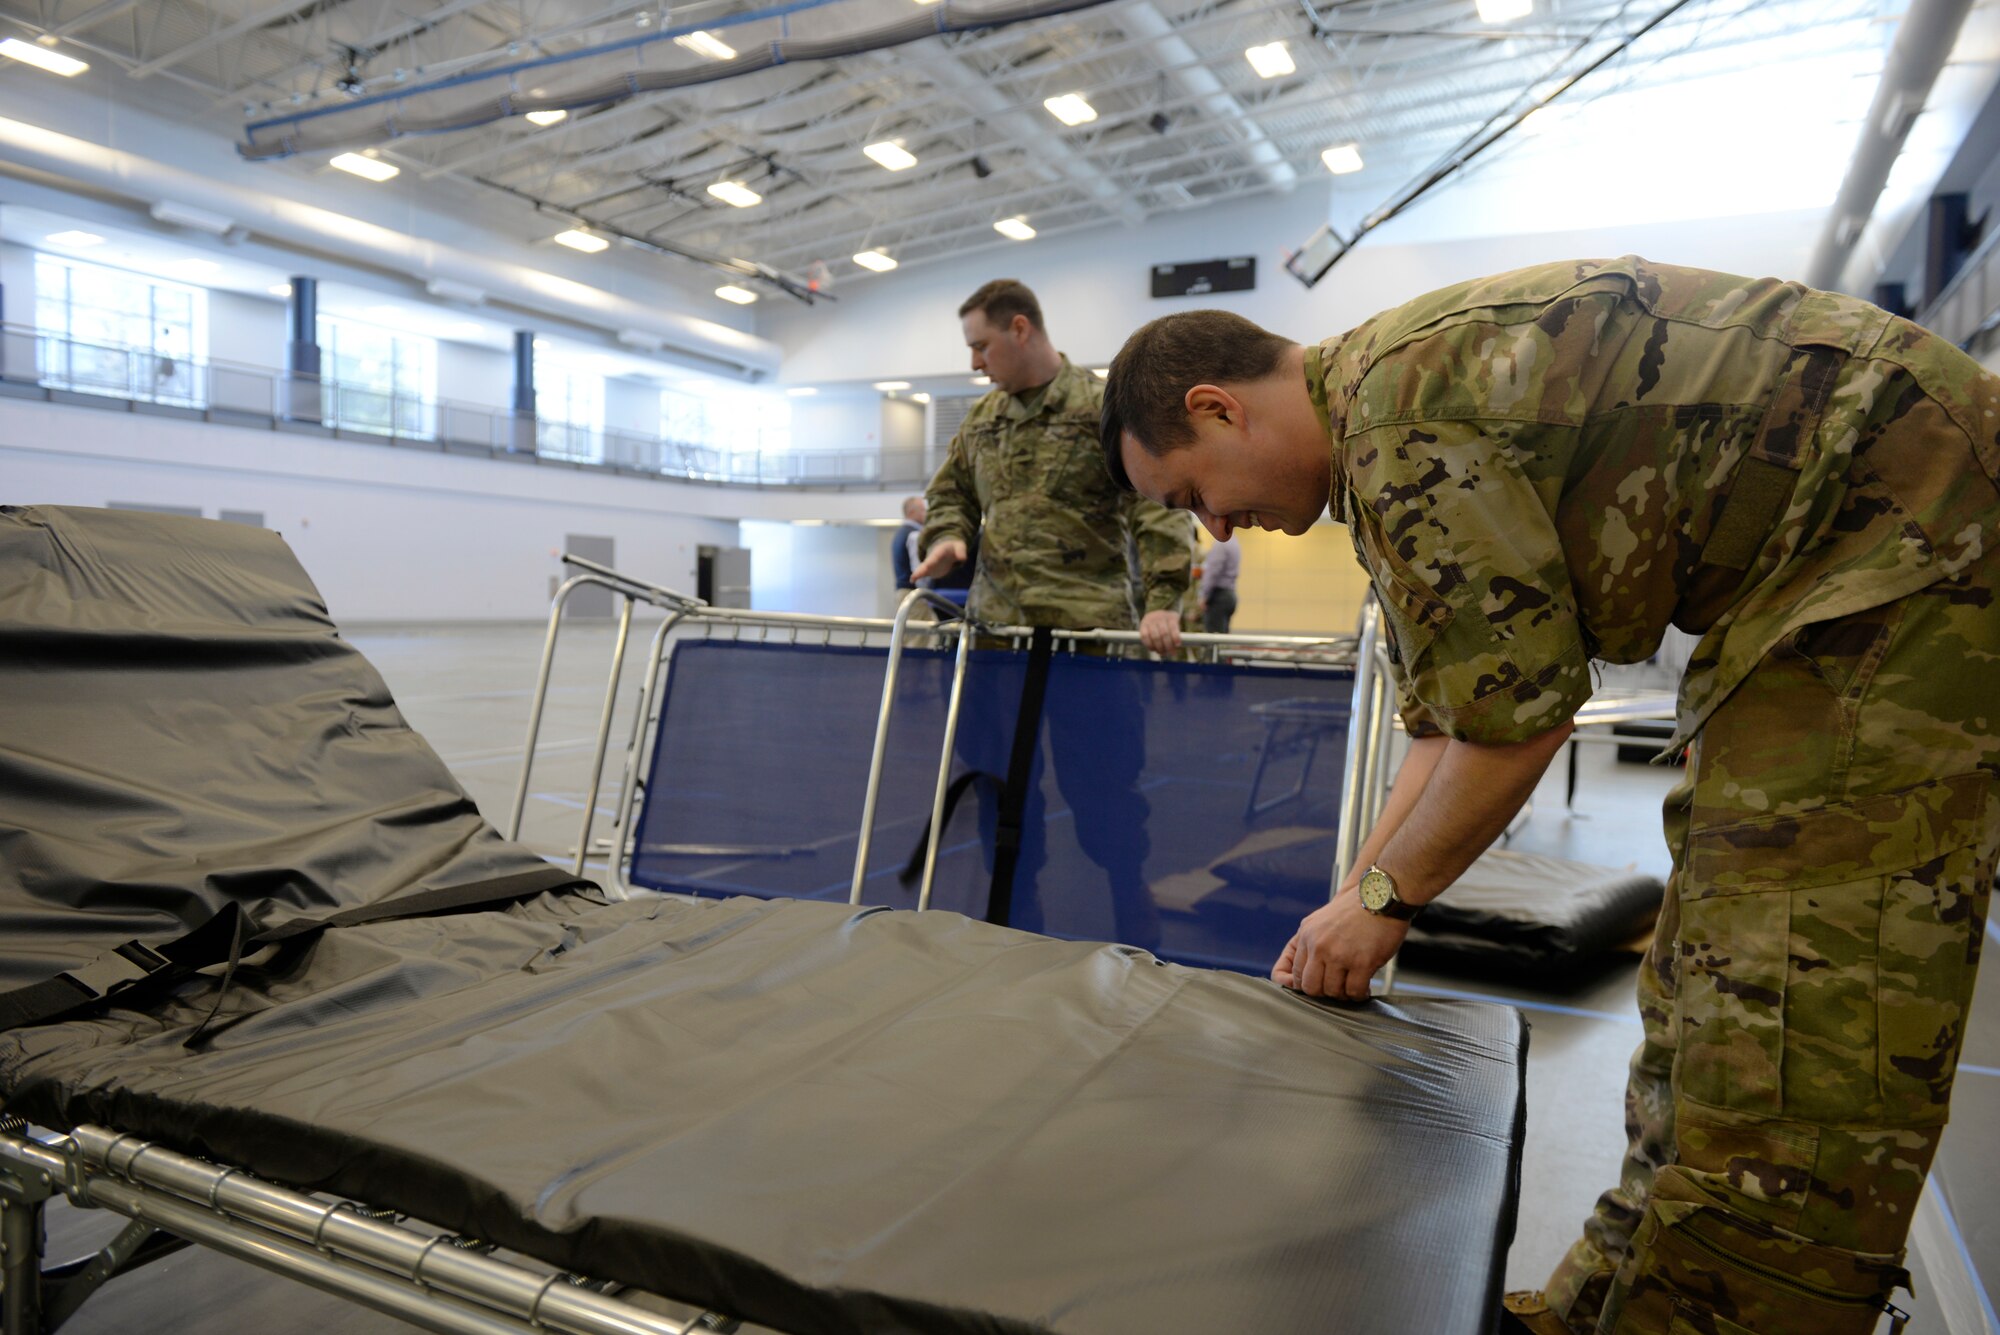 Capt. Jacob Ricciotti, foreground, a pilot for the 133rd Air Refueling Squadron, New Hampshire Air National Guard, and Pfc. Nathan Huston, a diesel mechanic for the 197th Field Artillery Brigade, New Hampshire Army National Guard set up beds at the Hamel Recreational Center at the University of New Hampshire in Durham, Mar. 23. The facility in Durham will augment area hospitals treating COVID-19 cases, if necessary. It is one of nine "surge" locations the NH Guard, in coordination with local and state healthcare agencies, plans to set up and manage across the state. (U.S. Air National Guard photo by Tech. Sgt. Aaron Vezeau)